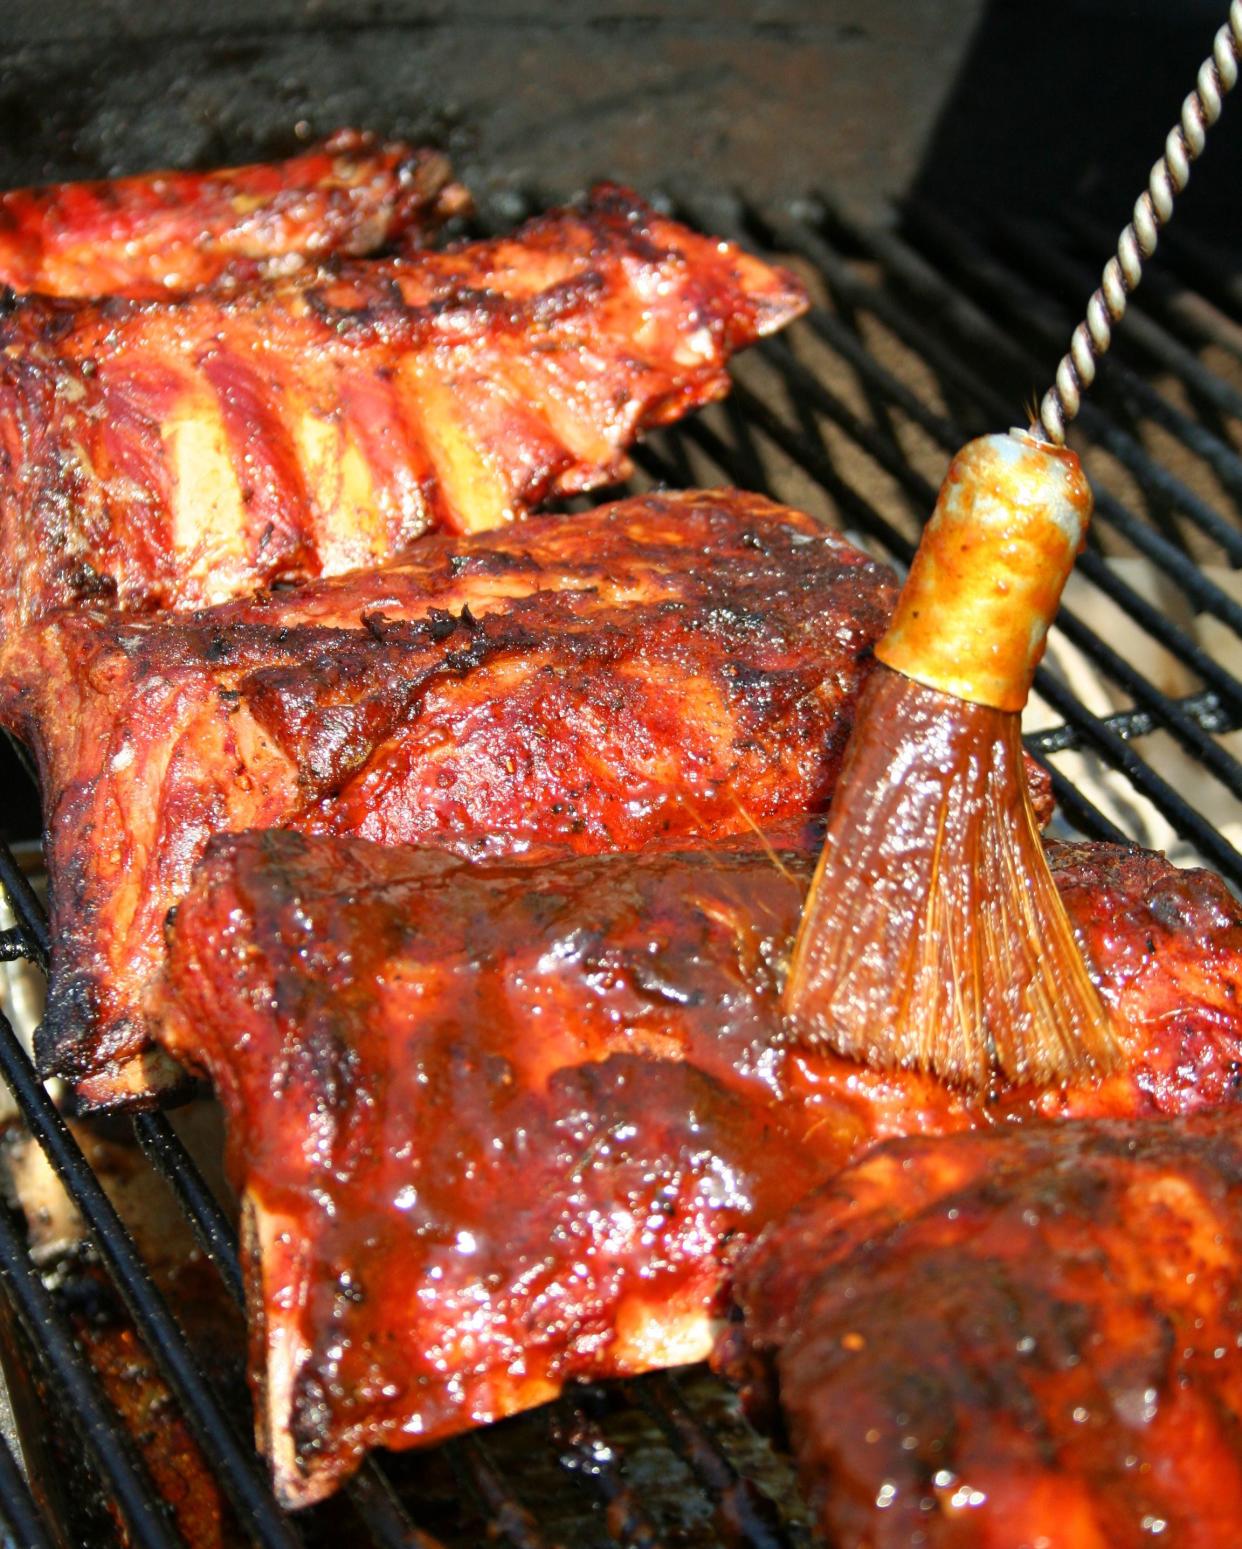 If you're adding sauce to ribs, do it near the end of your cooking time. If you add it too soon during grilling, the sugar in the sauce will burn.